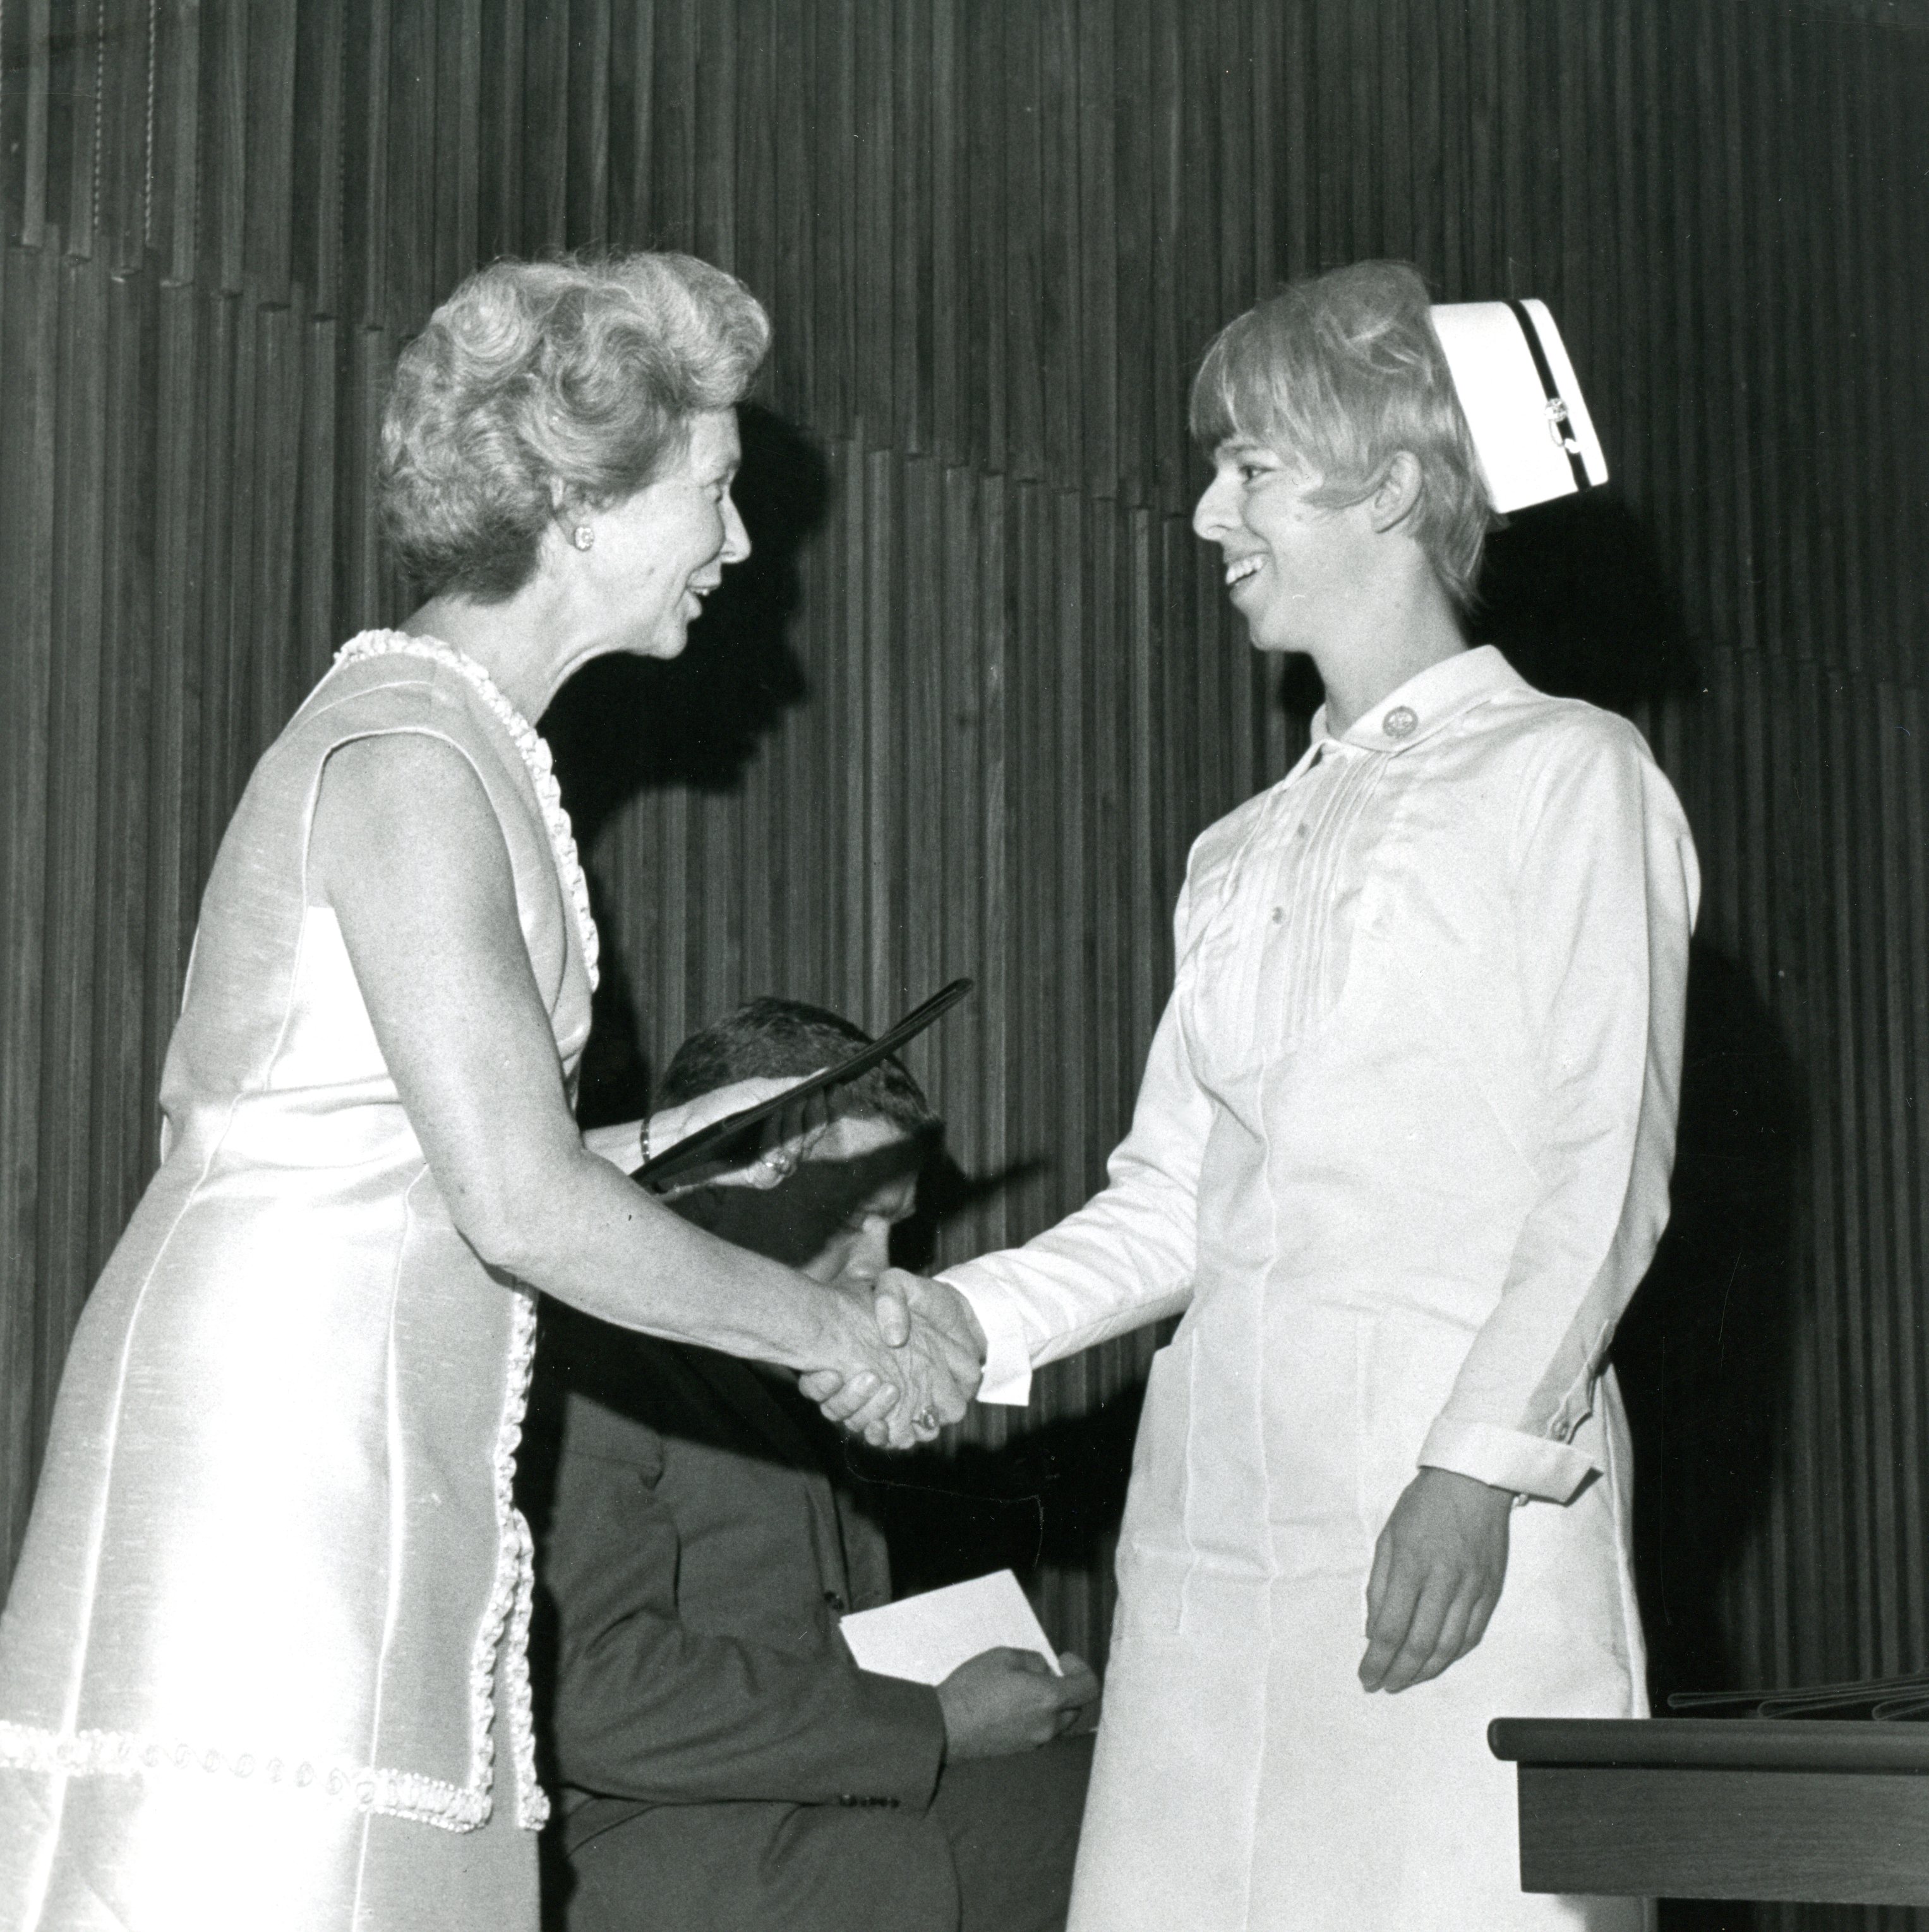 Two women shake hands, smiling. One is dressed in a formal dress, the other in nurses' uniform with cap. A man stands in the background.